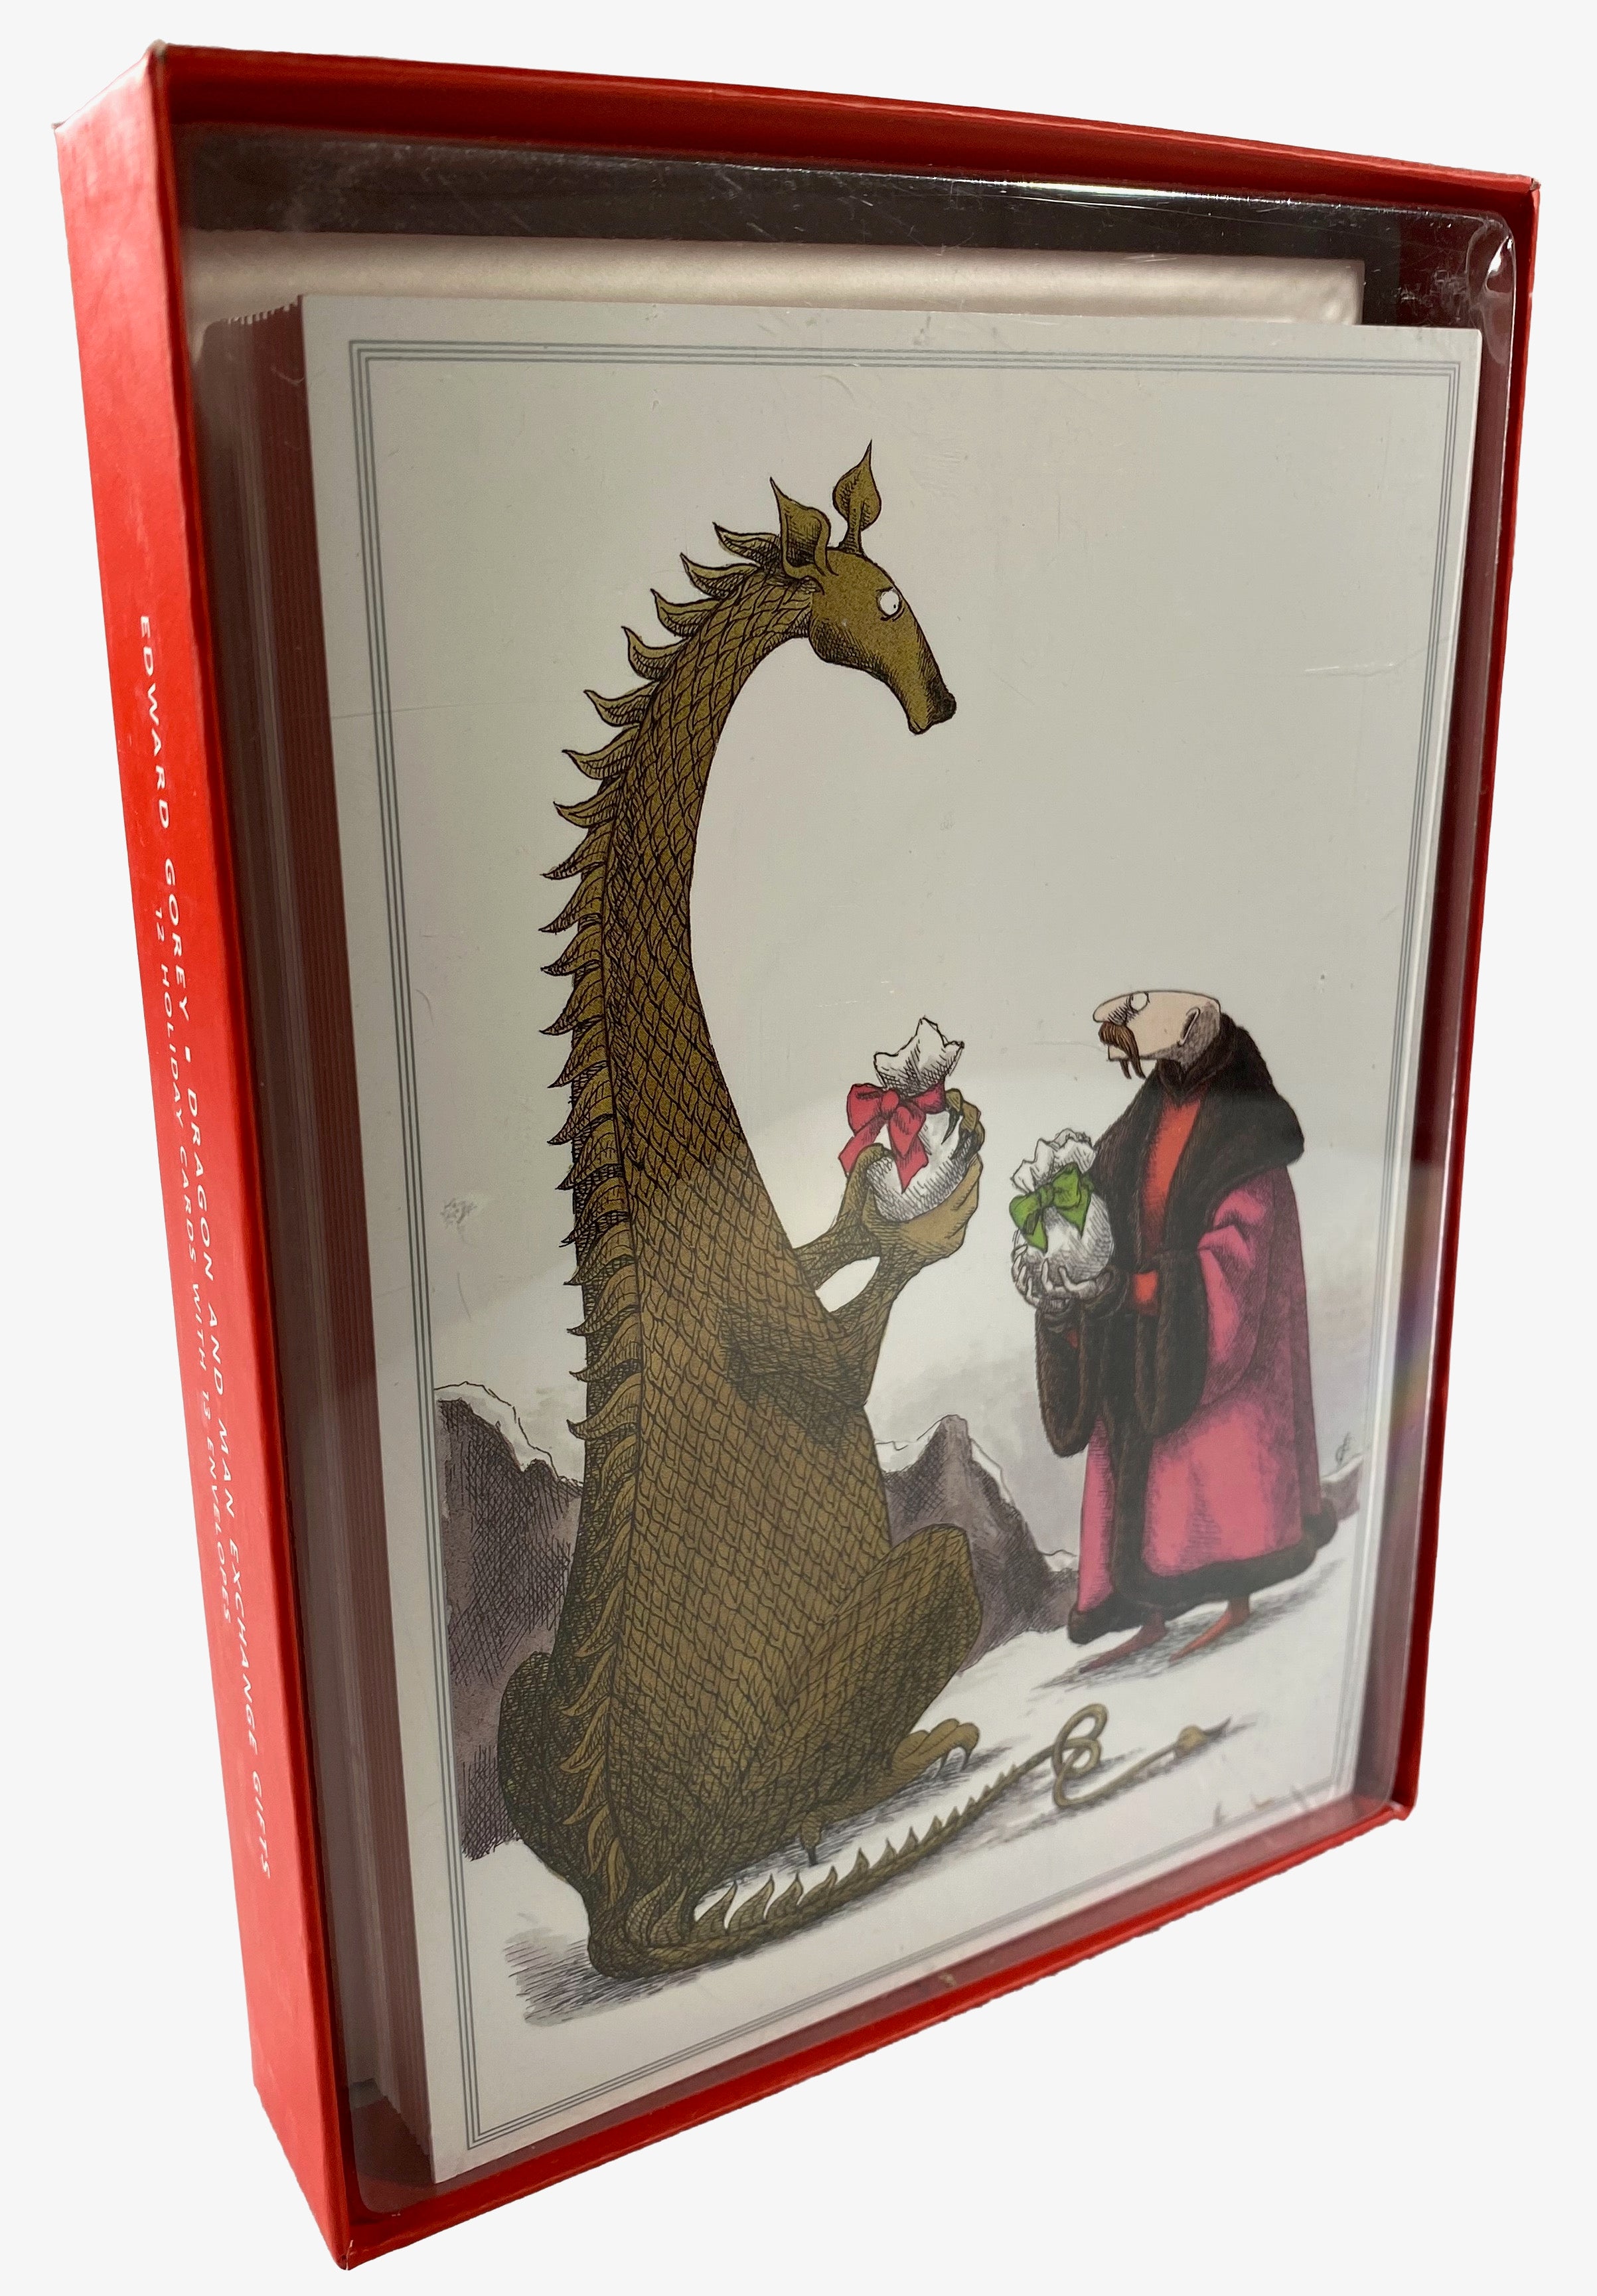 Edward Gorey Dragon and Man Exchanging Gifts - Boxed Christmas Cards    